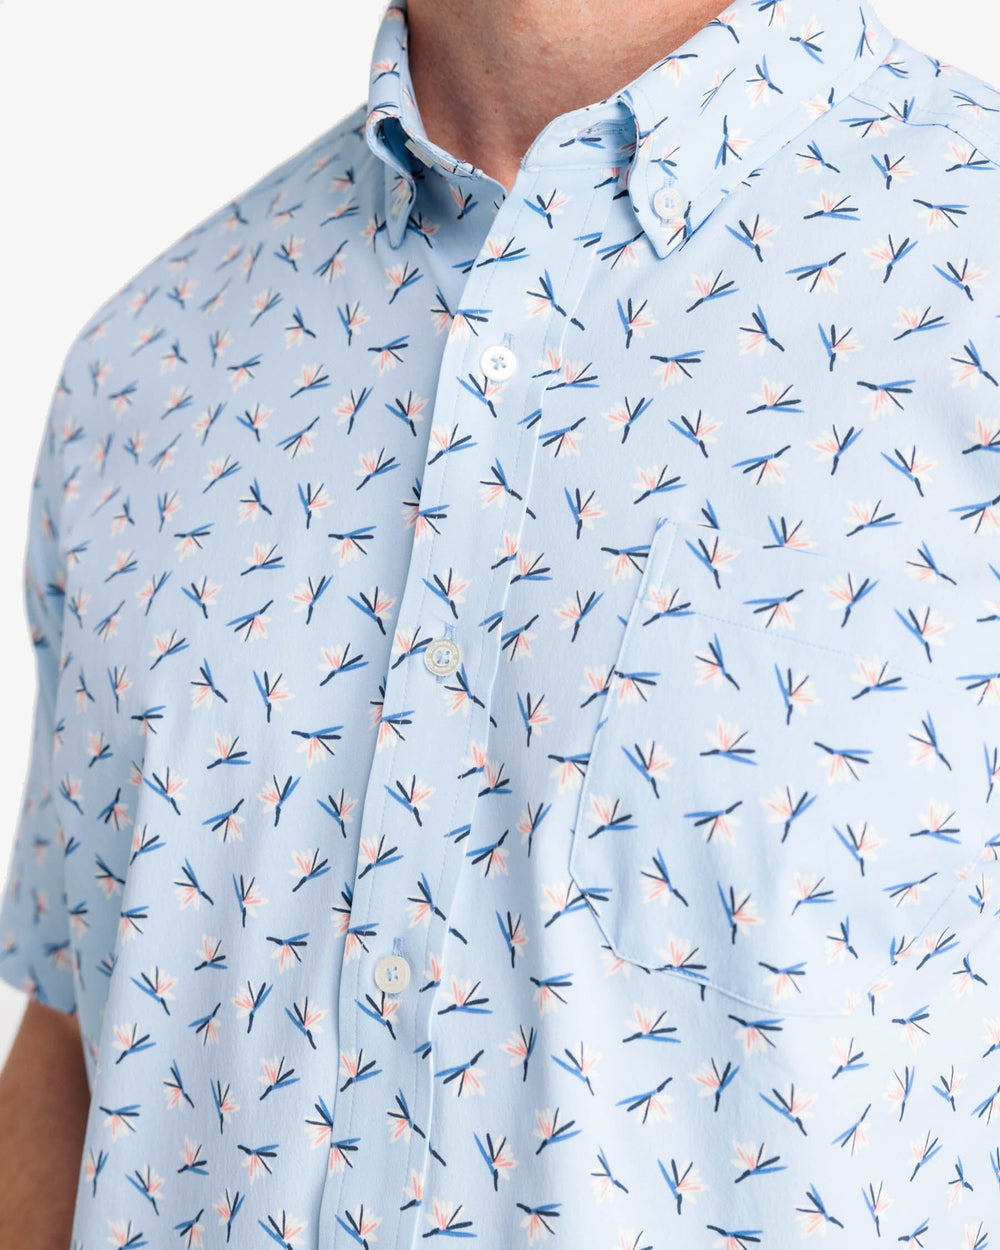 The detail view of the Southern Tide Paradise Park Printed Intercoastal Short Sleeve Button Down by Southern Tide - Rain Water